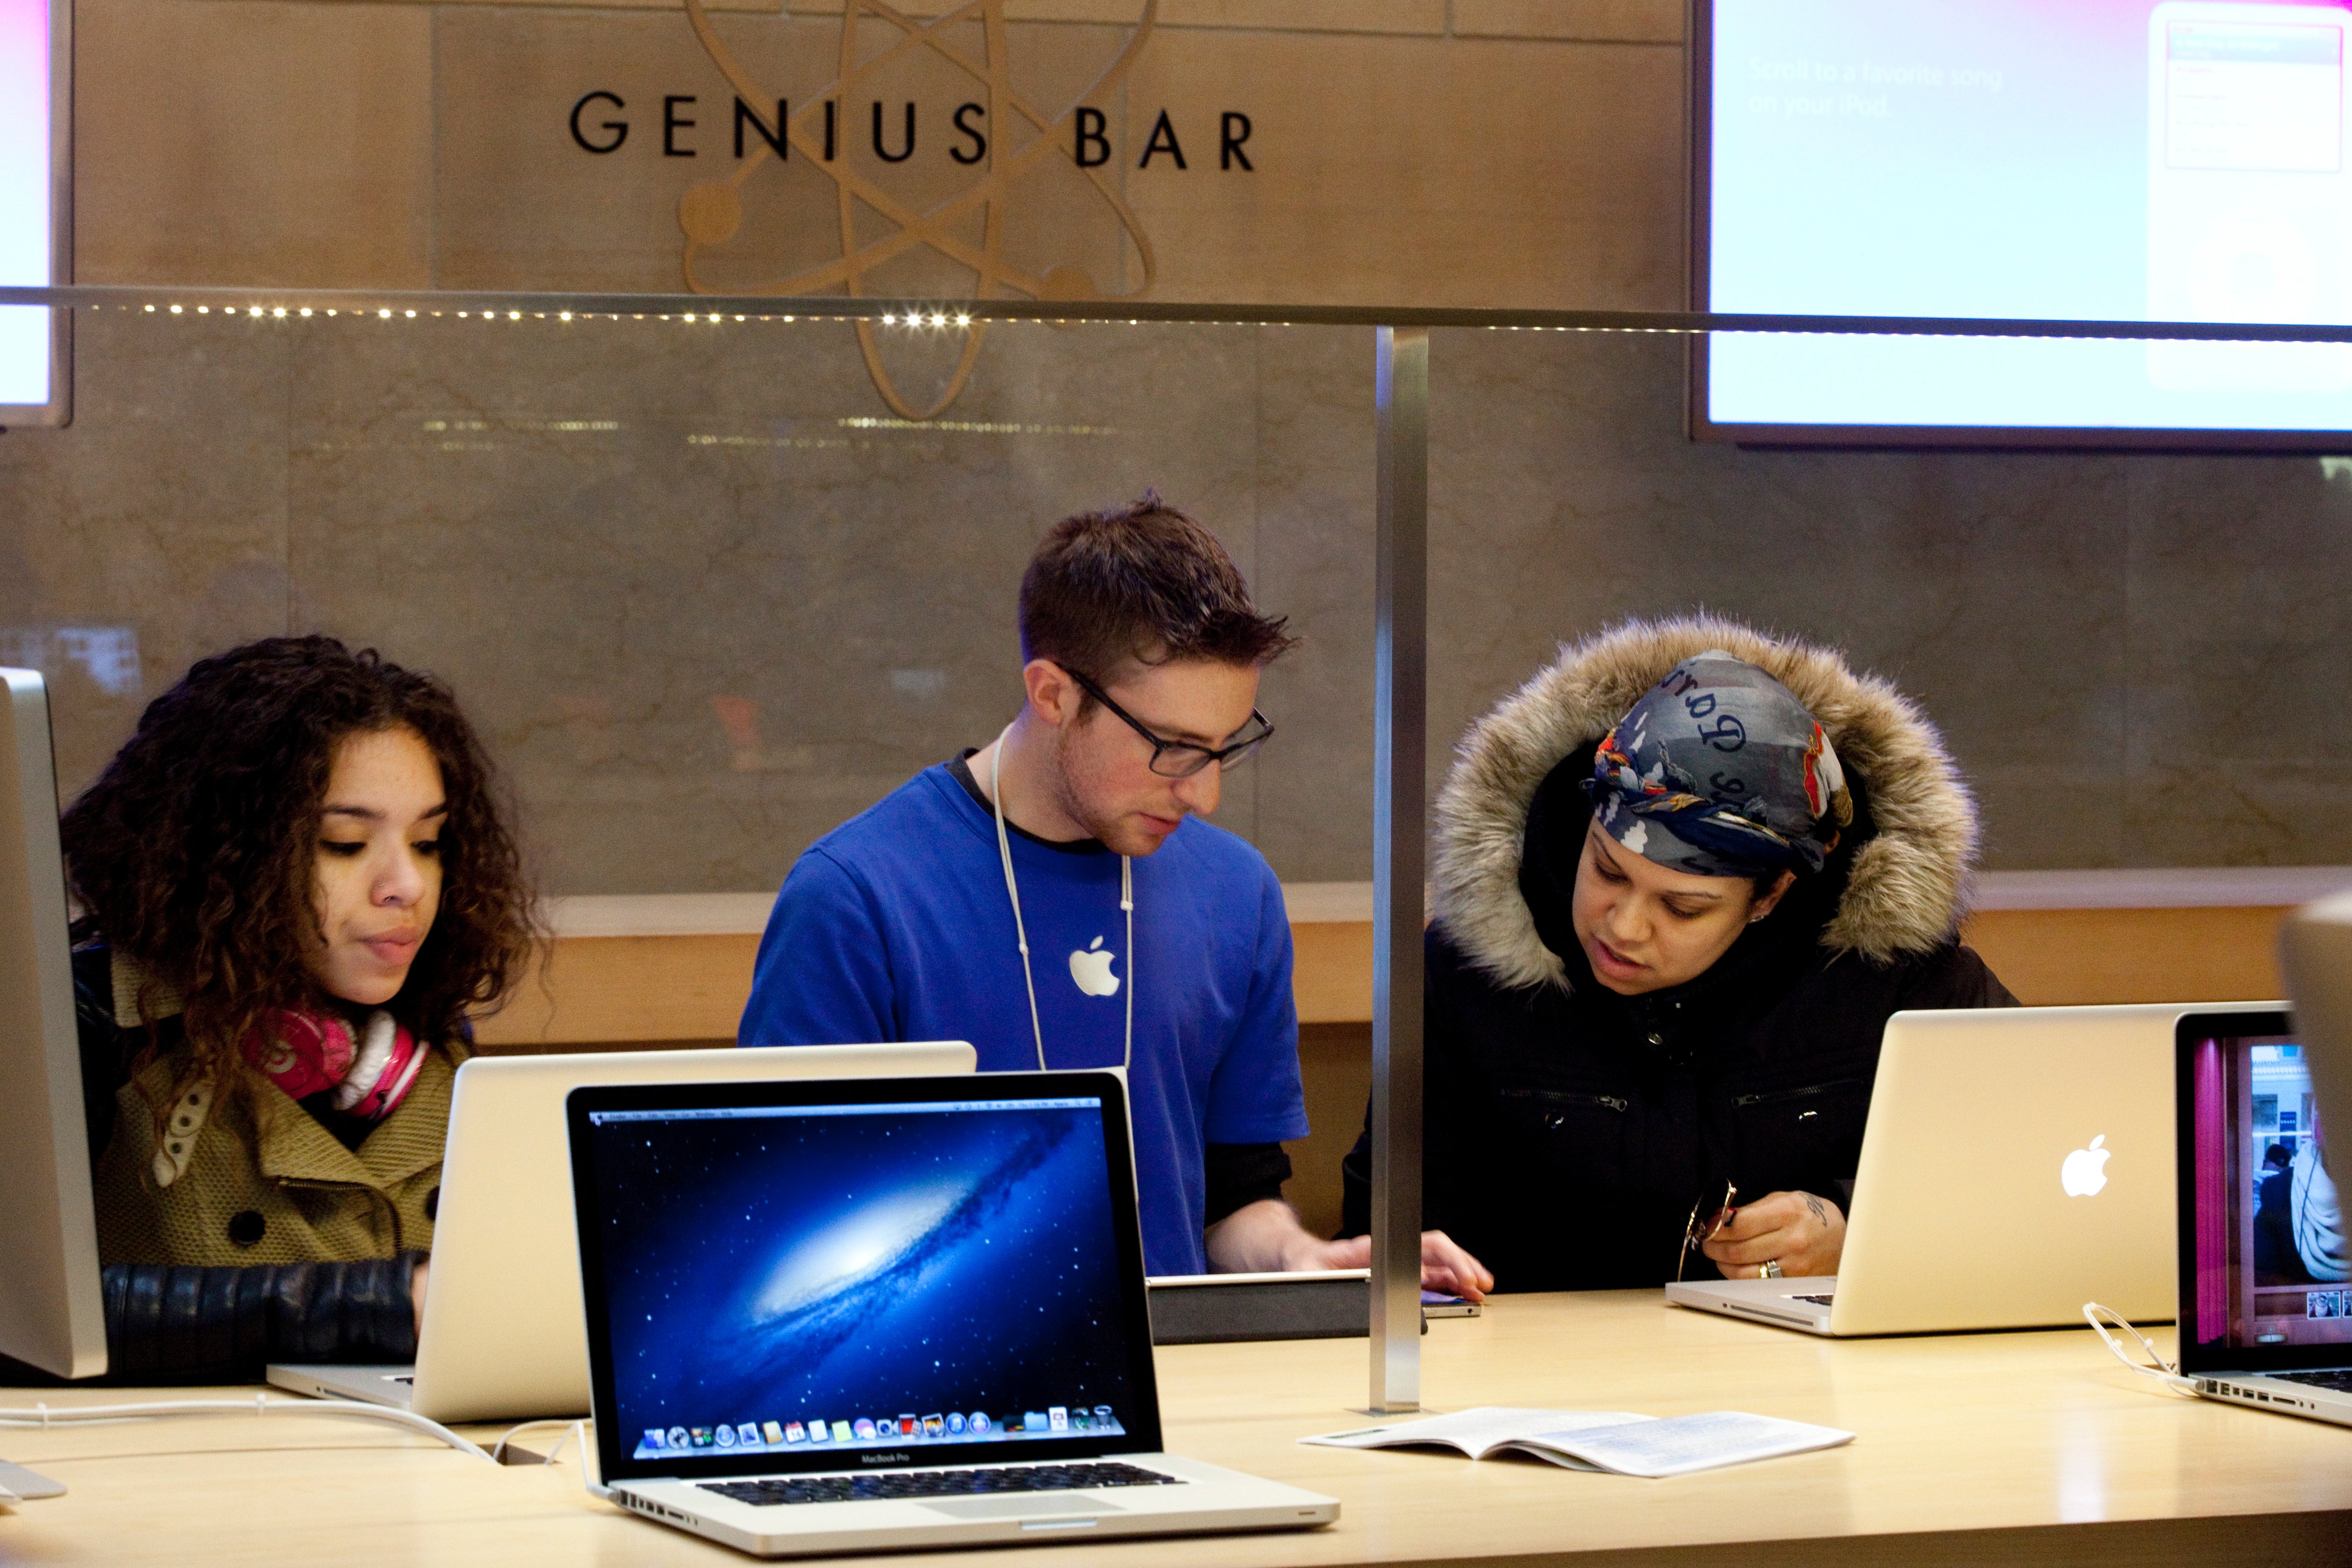 People are trained by an Apple employee at the Genius Bar at the Apple Store in Grand Central Terminal, on March 14, 2013 in New York, New York. (Christian Science Monitor&mdash;Christian Science Monitor/Getty)